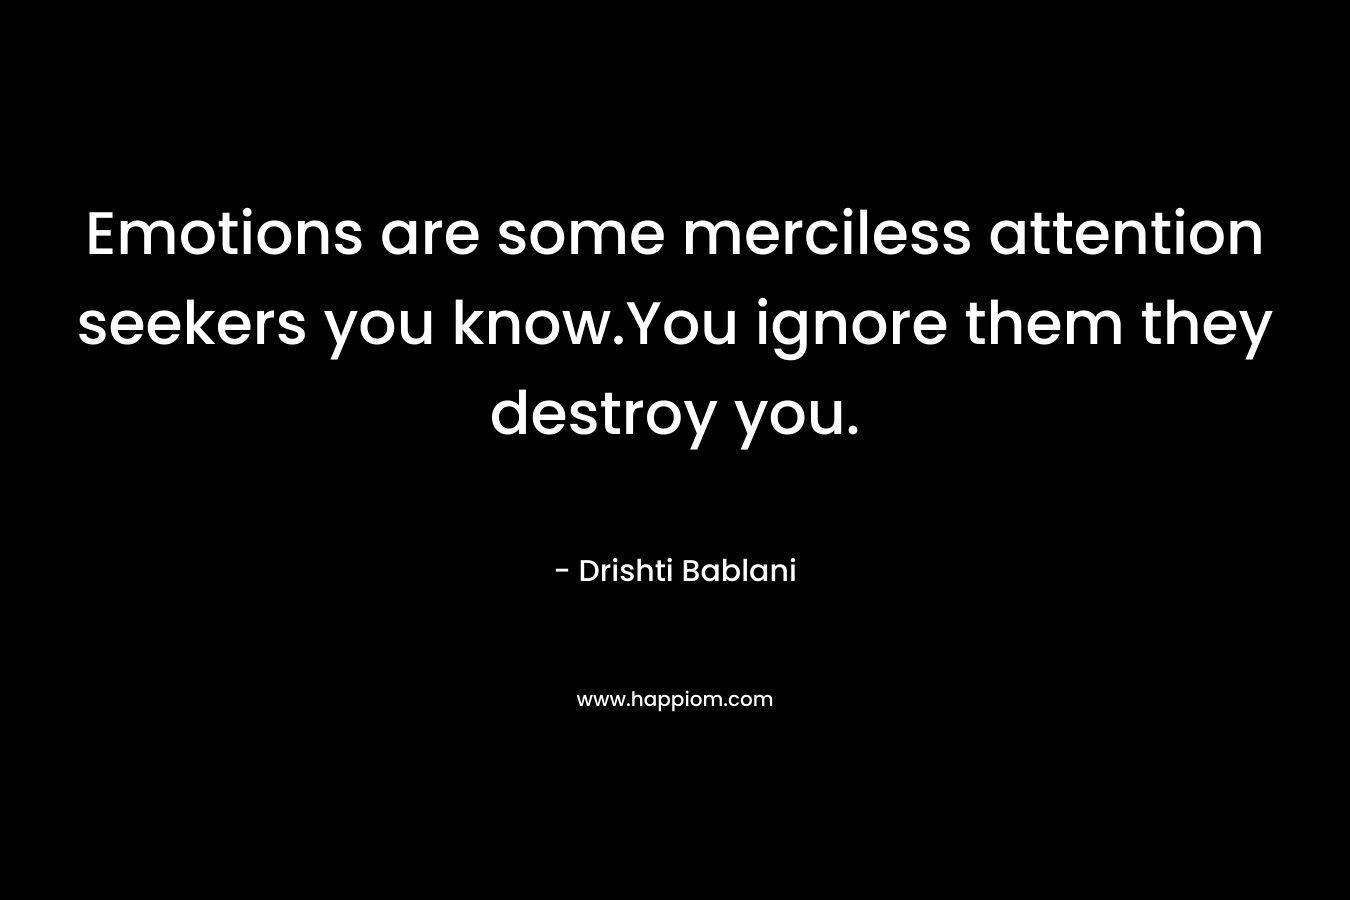 Emotions are some merciless attention seekers you know.You ignore them they destroy you. – Drishti Bablani